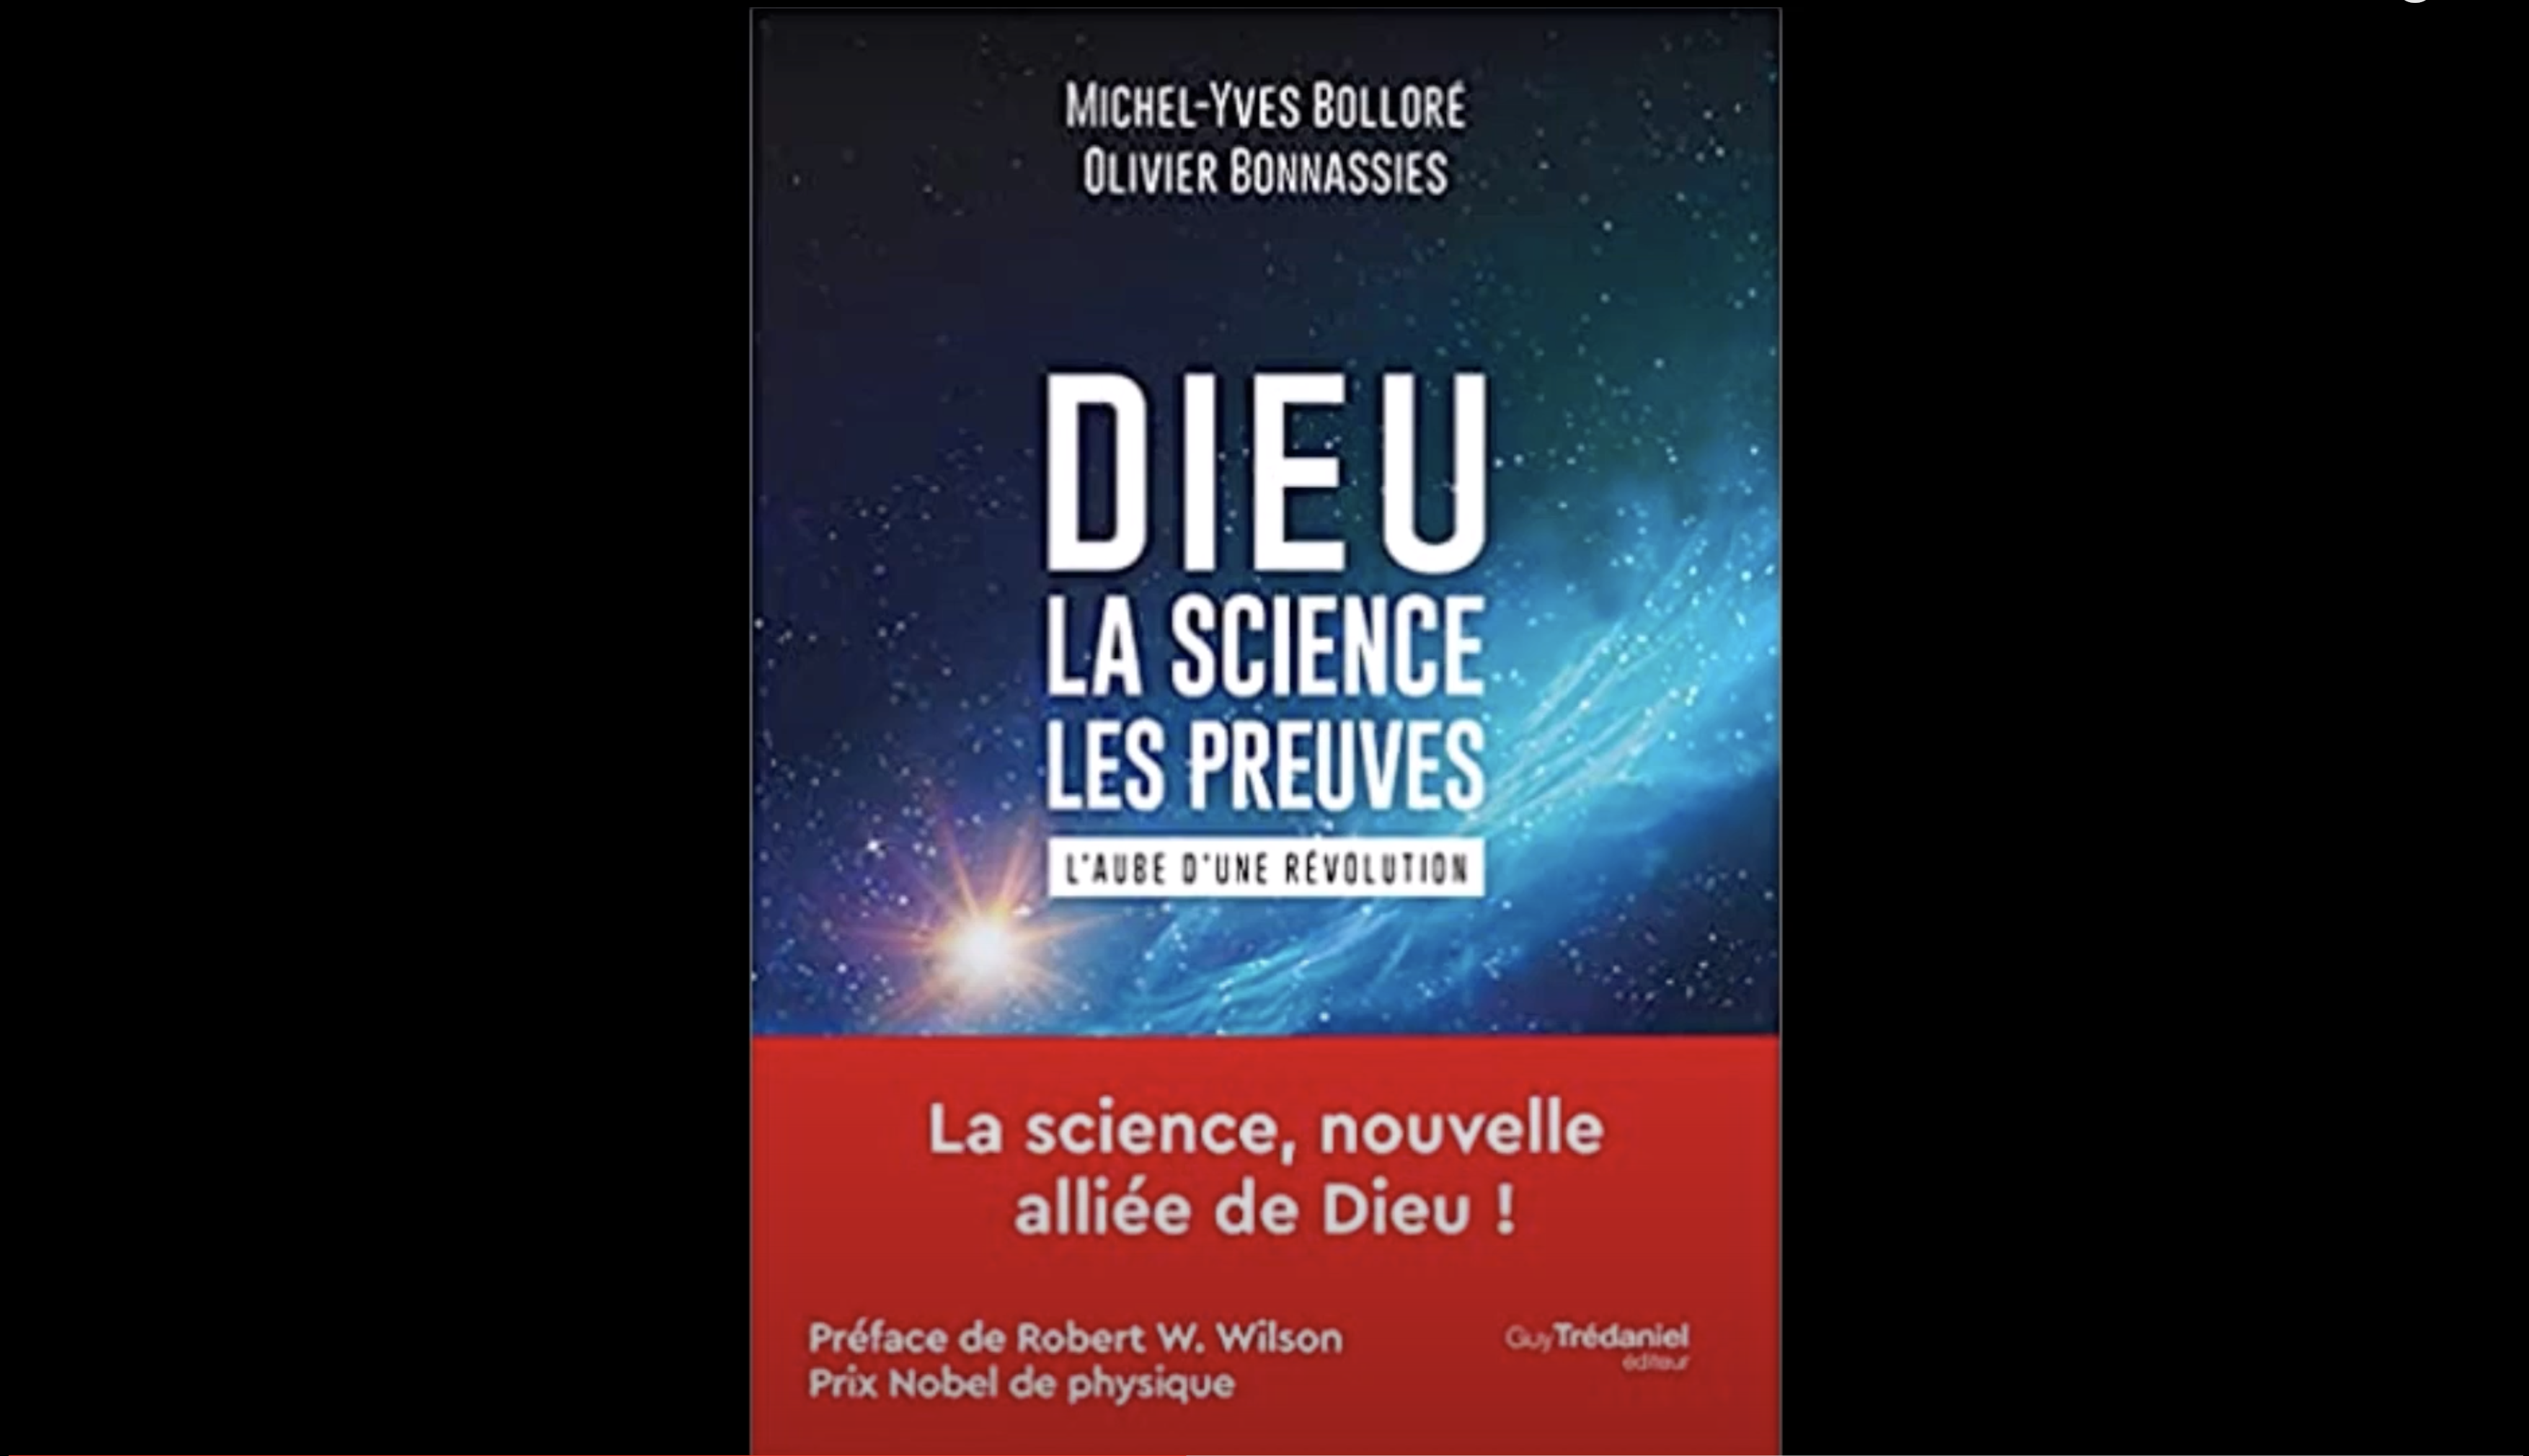 “God, Science, Evidence”: a bestseller that has passed the 200,000 sales mark and offers a collector’s edition